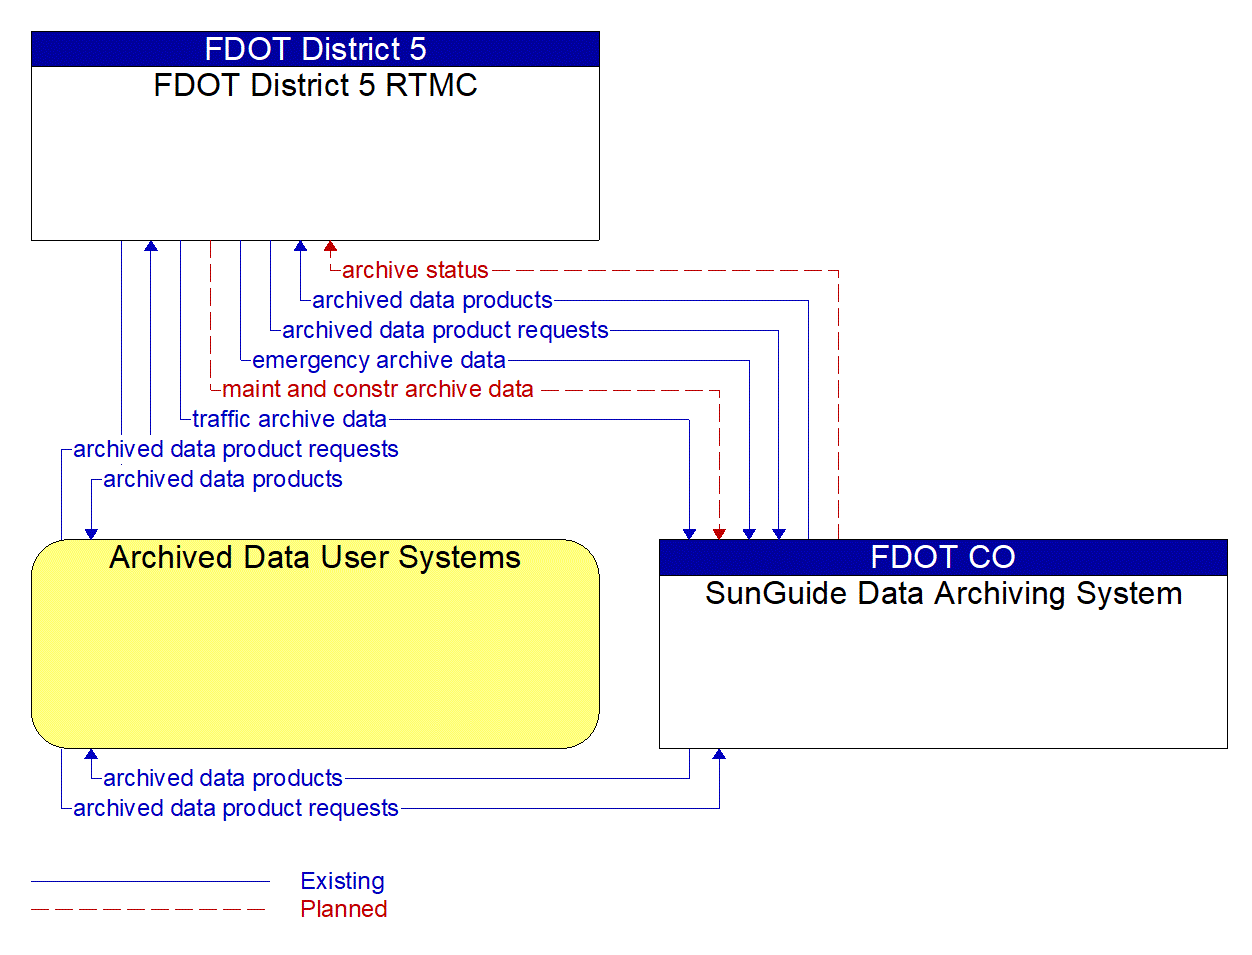 Service Graphic: ITS Data Warehouse (SunGuide Data Archiving)